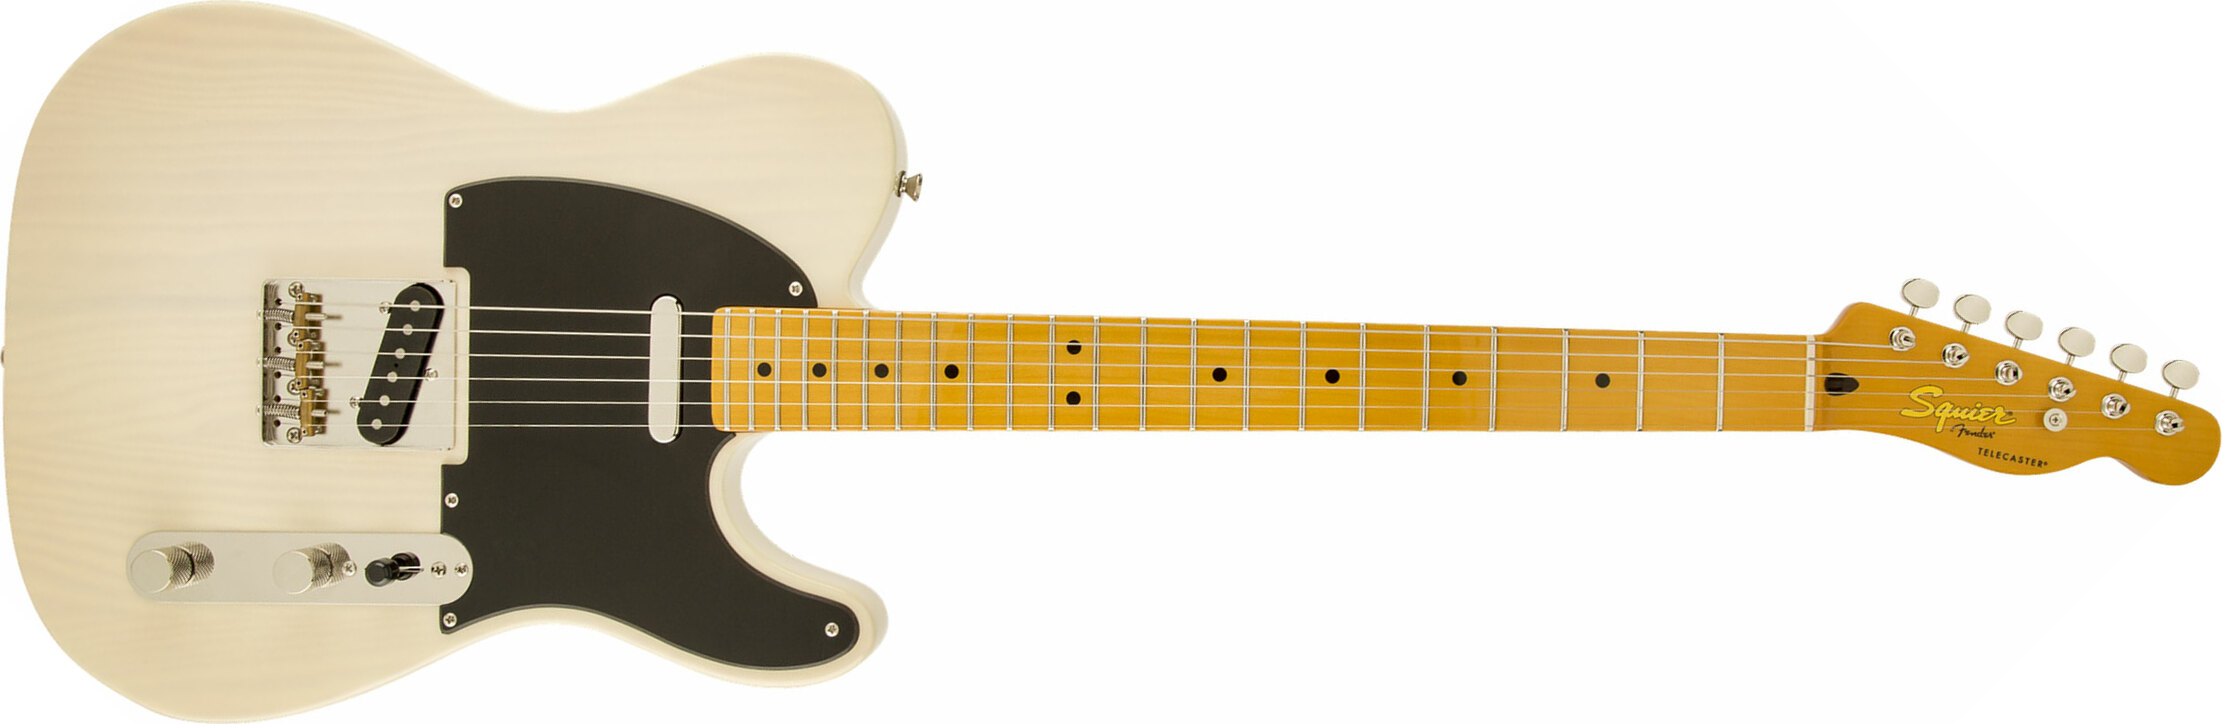 Squier Classic Vibe Telecaster '50s Mn - Vintage Blonde - Tel shape electric guitar - Main picture